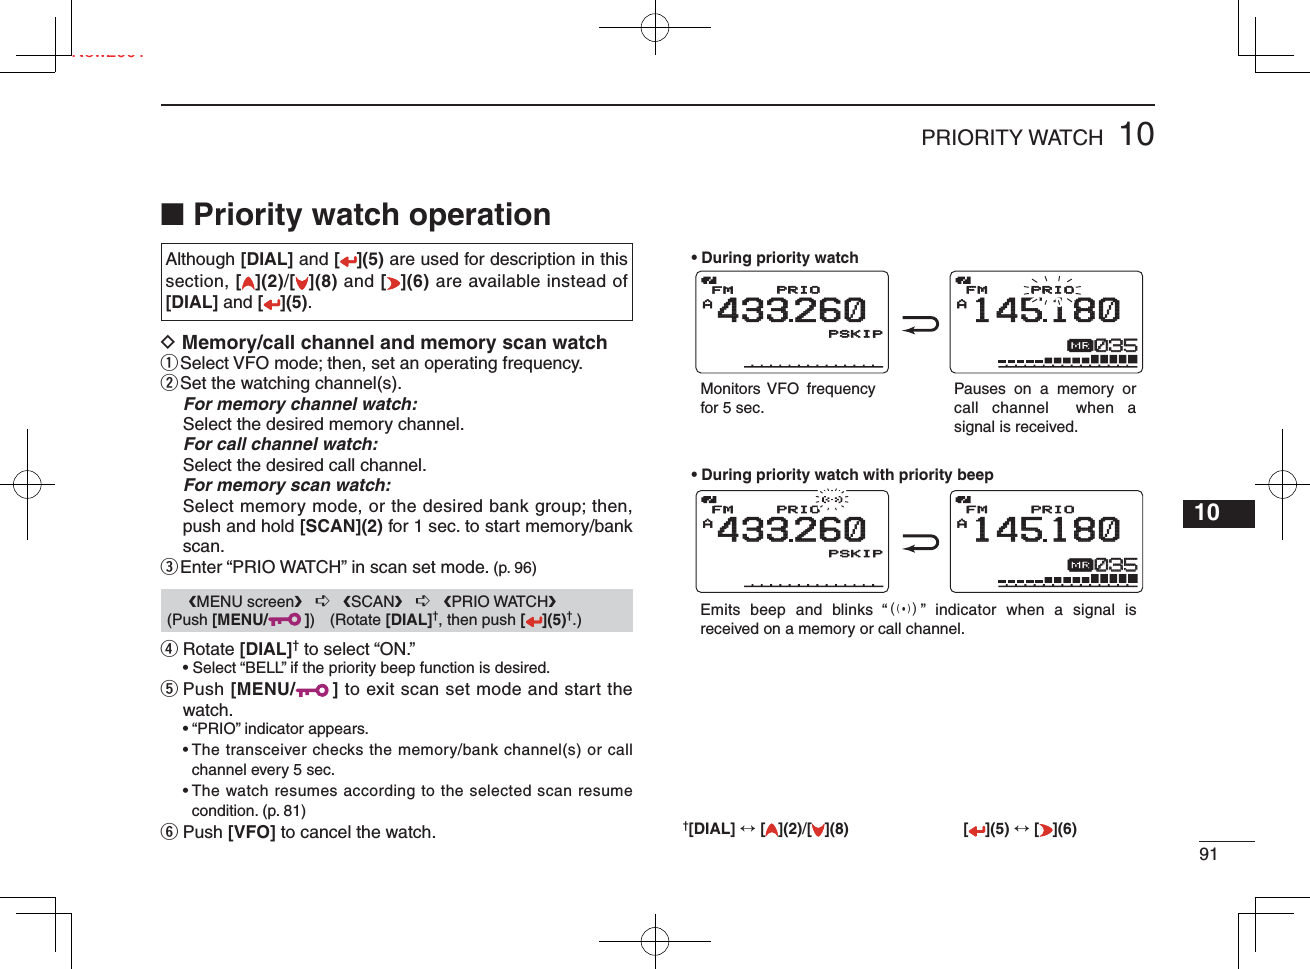 ■ Priority watch operationD  Memory/call channel and memory scan watchq Select VFO mode; then, set an operating frequency.w Set the watching channel(s).For memory channel watch:Select the desired memory channel.For call channel watch:Select the desired call channel.For memory scan watch:Select memory mode, or the desired bank group; then, push and hold [SCAN](2) for 1 sec. to start memory/bank scan.e Enter “PRIO WATCH” in scan set mode. (p. 96)r  Rotate [DIAL]† to select “ON.” •  Select “BELL” if the priority beep function is desired.t  Push [MENU/ ] to exit scan set mode and start the watch.• “PRIO” indicator appears.•  The transceiver checks the memory/bank channel(s) or call channel every 5 sec.•  The watch resumes according to the selected scan resume condition. (p. 81)y  Push [VFO] to cancel the watch.New20019110PRIORITY WATCH12345678910111213141516171819Although [DIAL] and [ ](5) are used for description in this section, [](2)/[](8) and [](6) are available instead of [DIAL] and [](5).      ❮MENU screen❯   ➪   ❮SCAN❯   ➪   ❮PRIO WATCH❯ (Push [MENU/ ]) (Rotate [DIAL]†, then push [ ](5)†.)• During priority watchMonitors VFO frequency for 5 sec.Pauses on a memory or call channel  when a signal is received.• During priority watch with priority beepEmits beep and blinks “S” indicator when a signal is received on a memory or call channel.PRIOPRIOFMFMA145180μ035035PRIOPRIOFMA433260PSKIPSKIPPRIOPRIOFMFMA145180μ035035PRIOPRIOFMA433260PSKIPSKIP†[DIAL] ↔ [ ](2)/[](8) [ ](5) ↔ [ ](6)